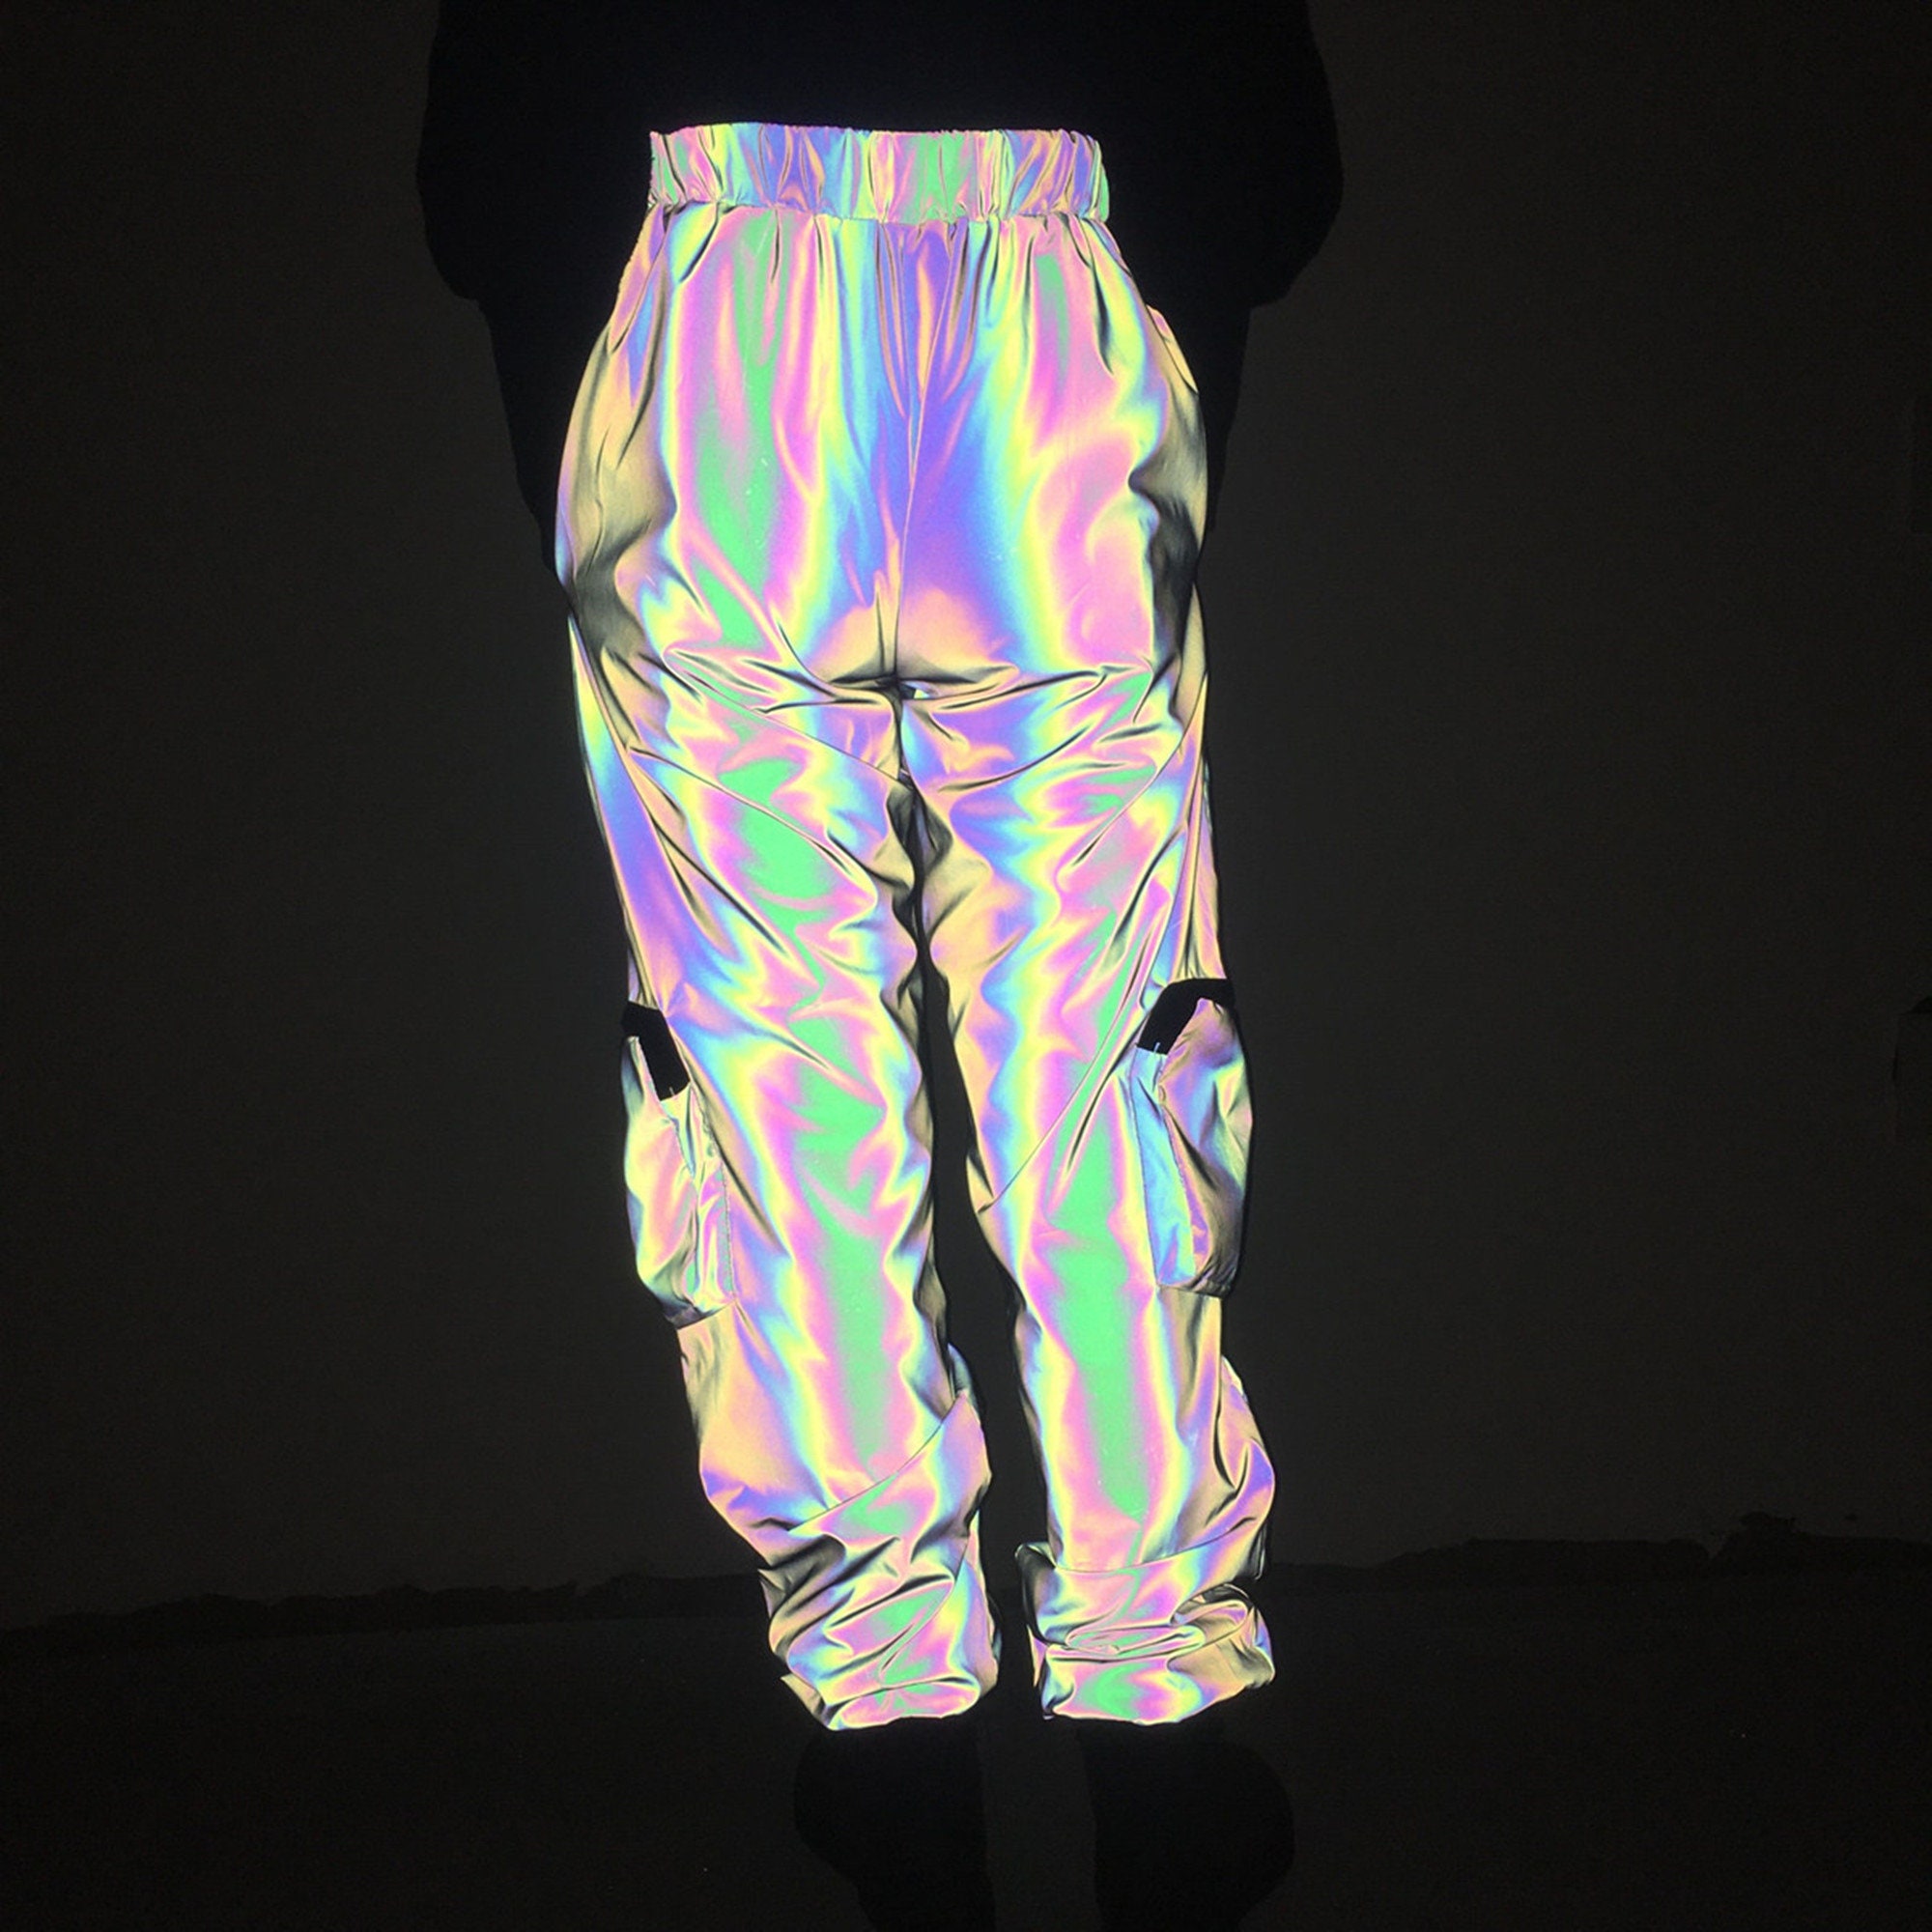 Holographic Women's Reflective Rainbow Pants, Reflective Cargo Pants,  Psychedelic Multi-pocket Pants, Rave Outfit Concert Clothing 